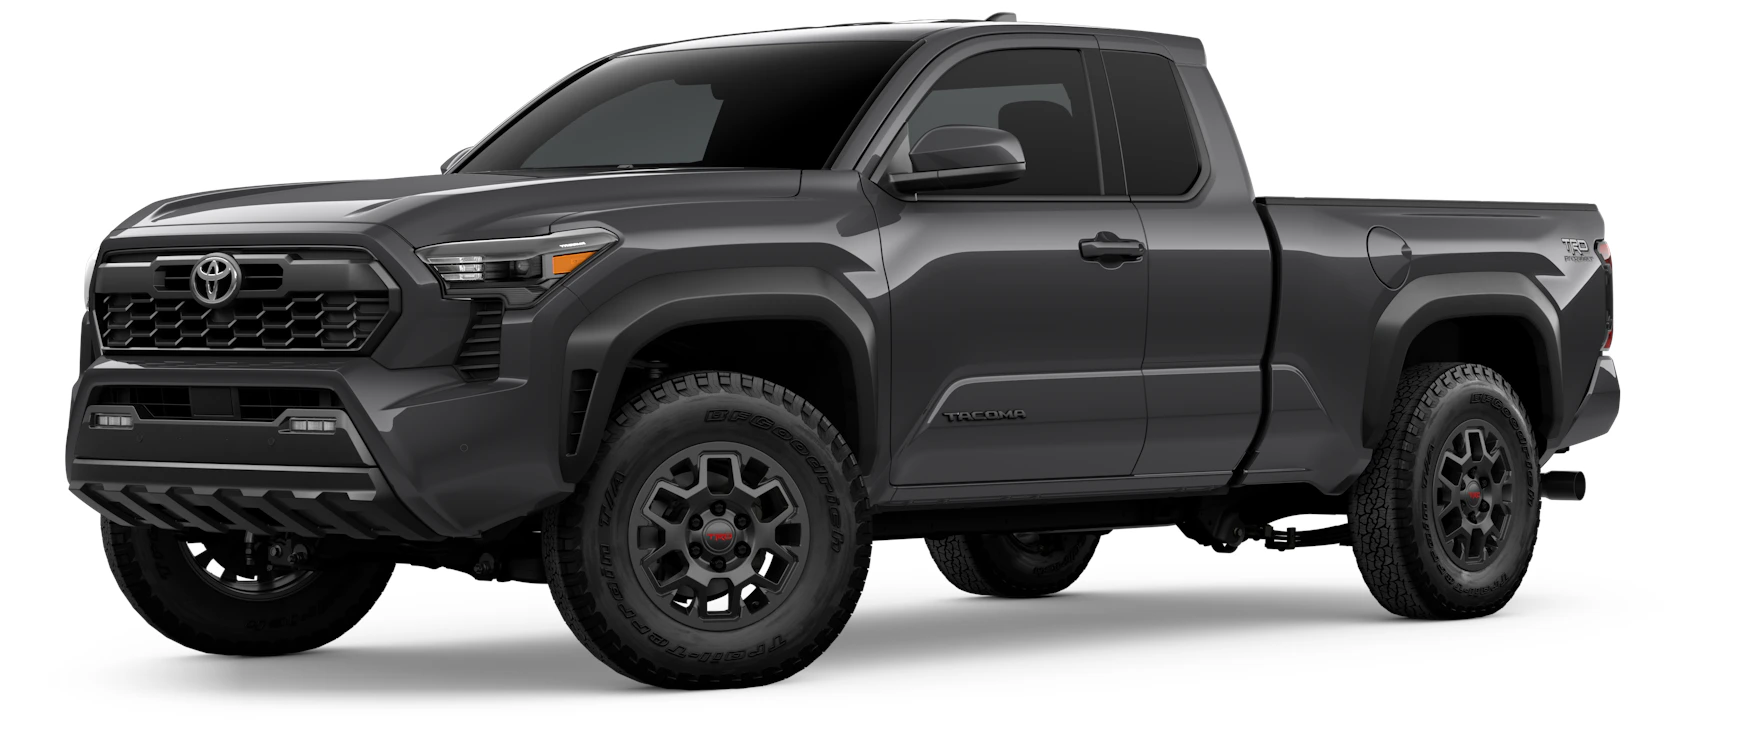 Head Into the Desert With the TRD PreRunner